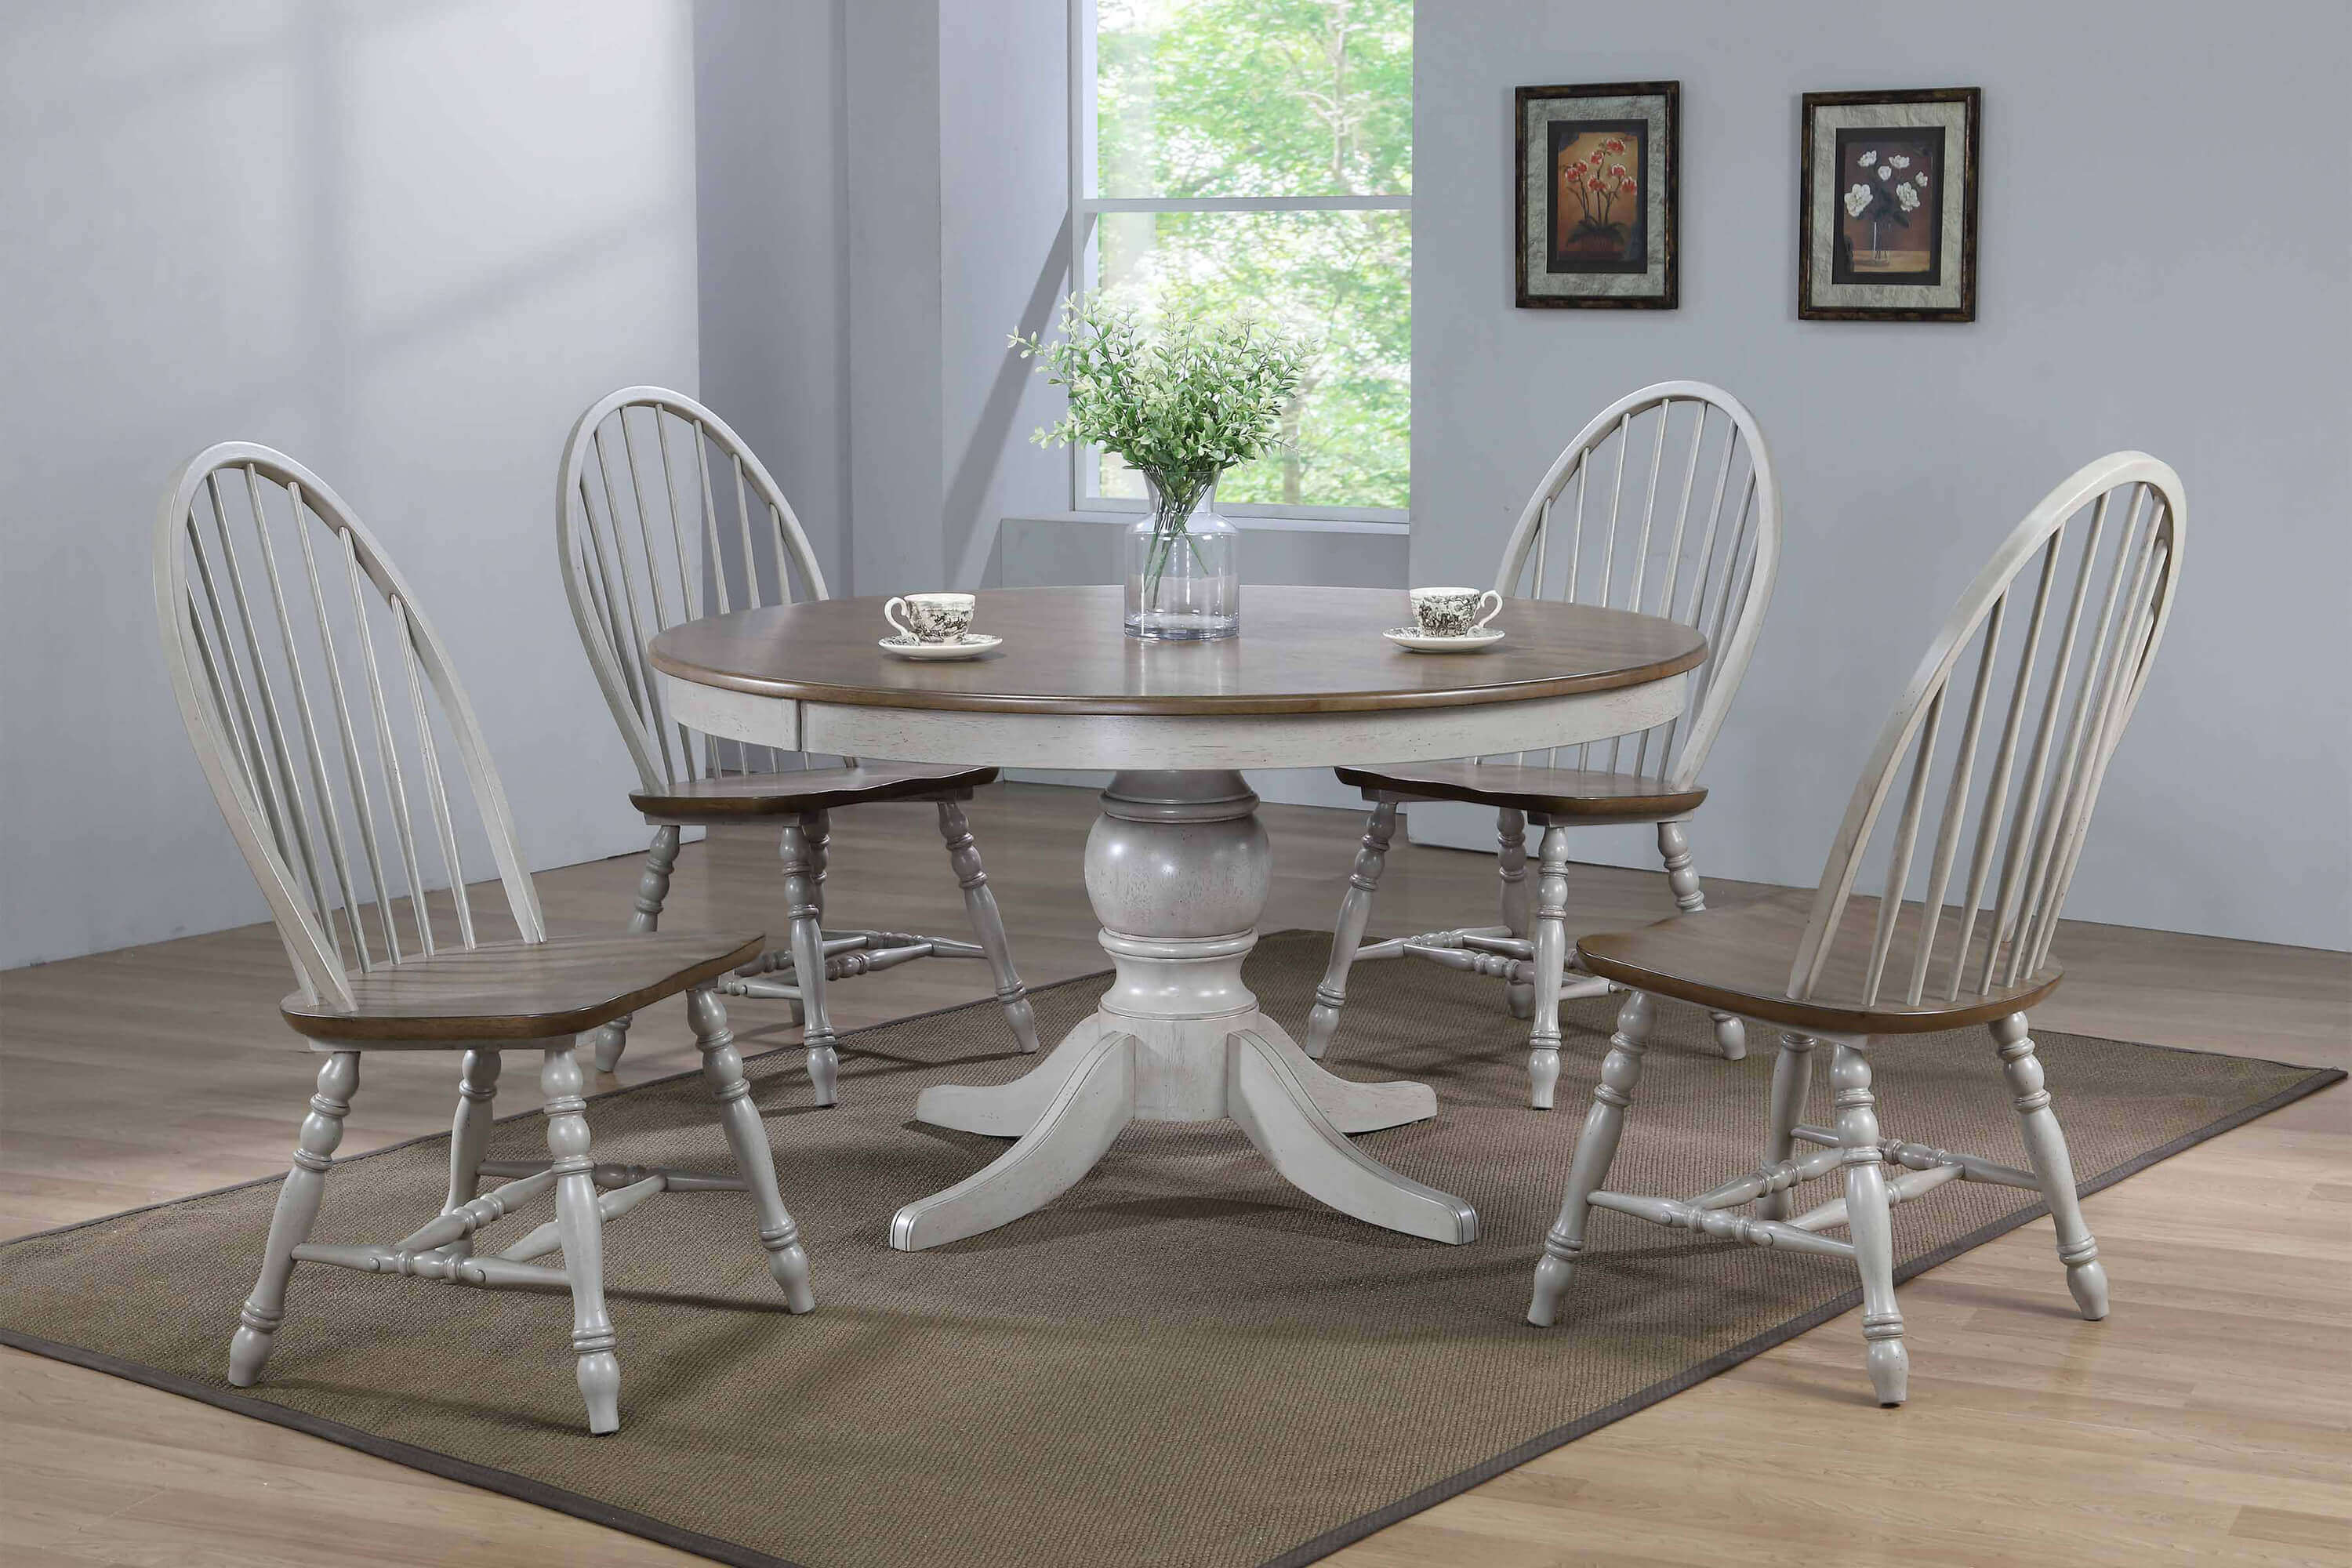 Jack Round Pedastal Dining Table Set, Circular Kitchen Table And Chairs Set